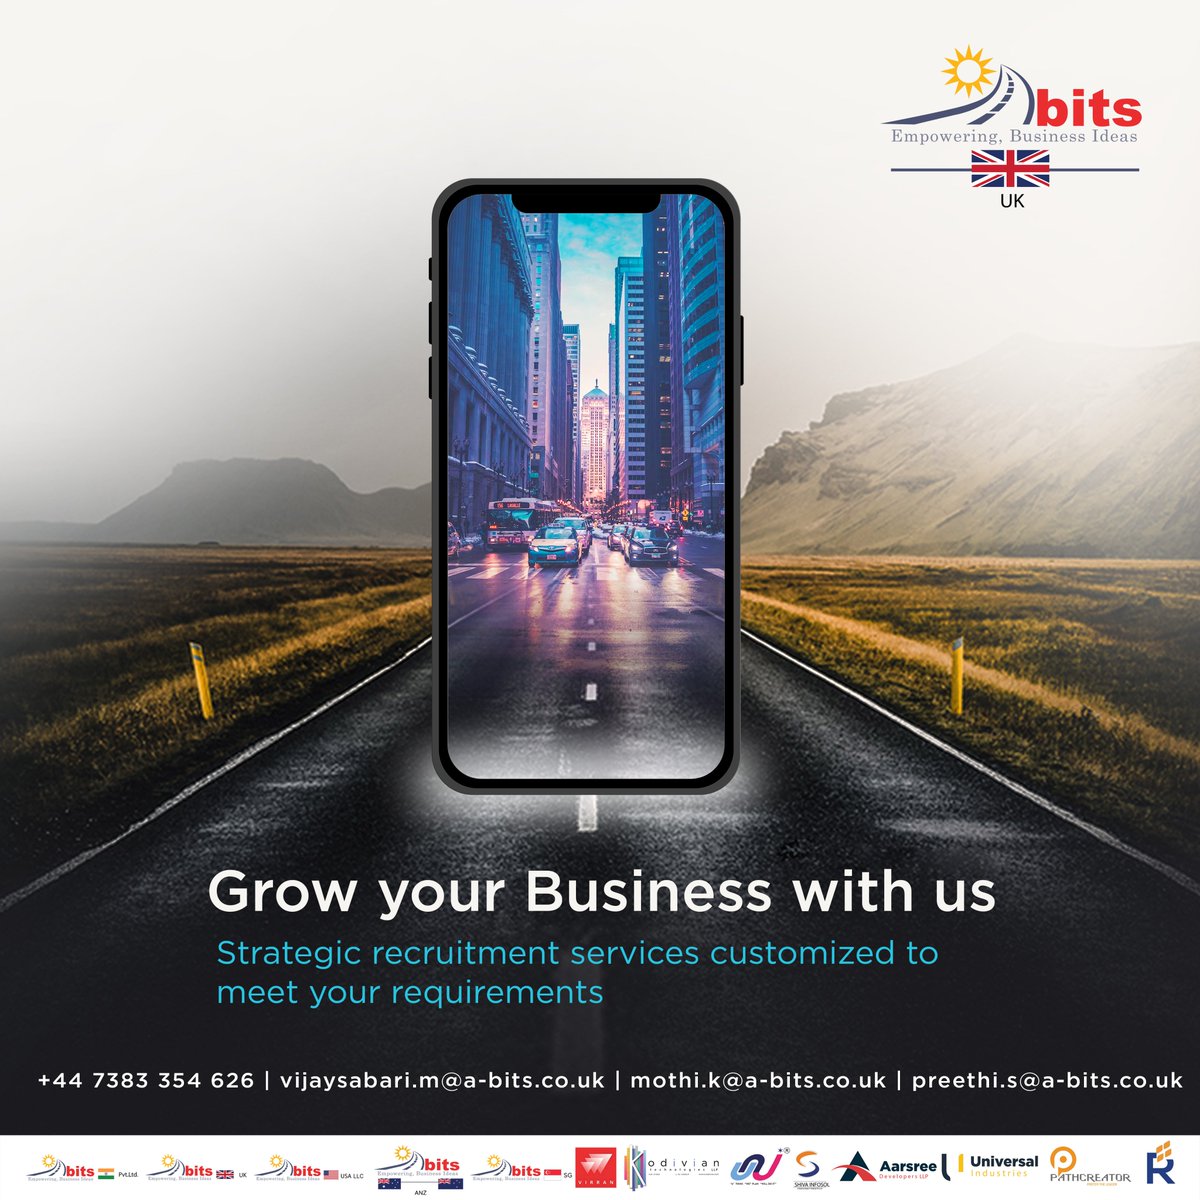 Make the Right choice and Grow your Business with us...
#abits #abitsuk #ssgroup #ssgroupofcompanies #customizedsolutions #customerfirst #customizedservices #recruitment #recruitmentexcellence #recruitmentexcellence #requirements